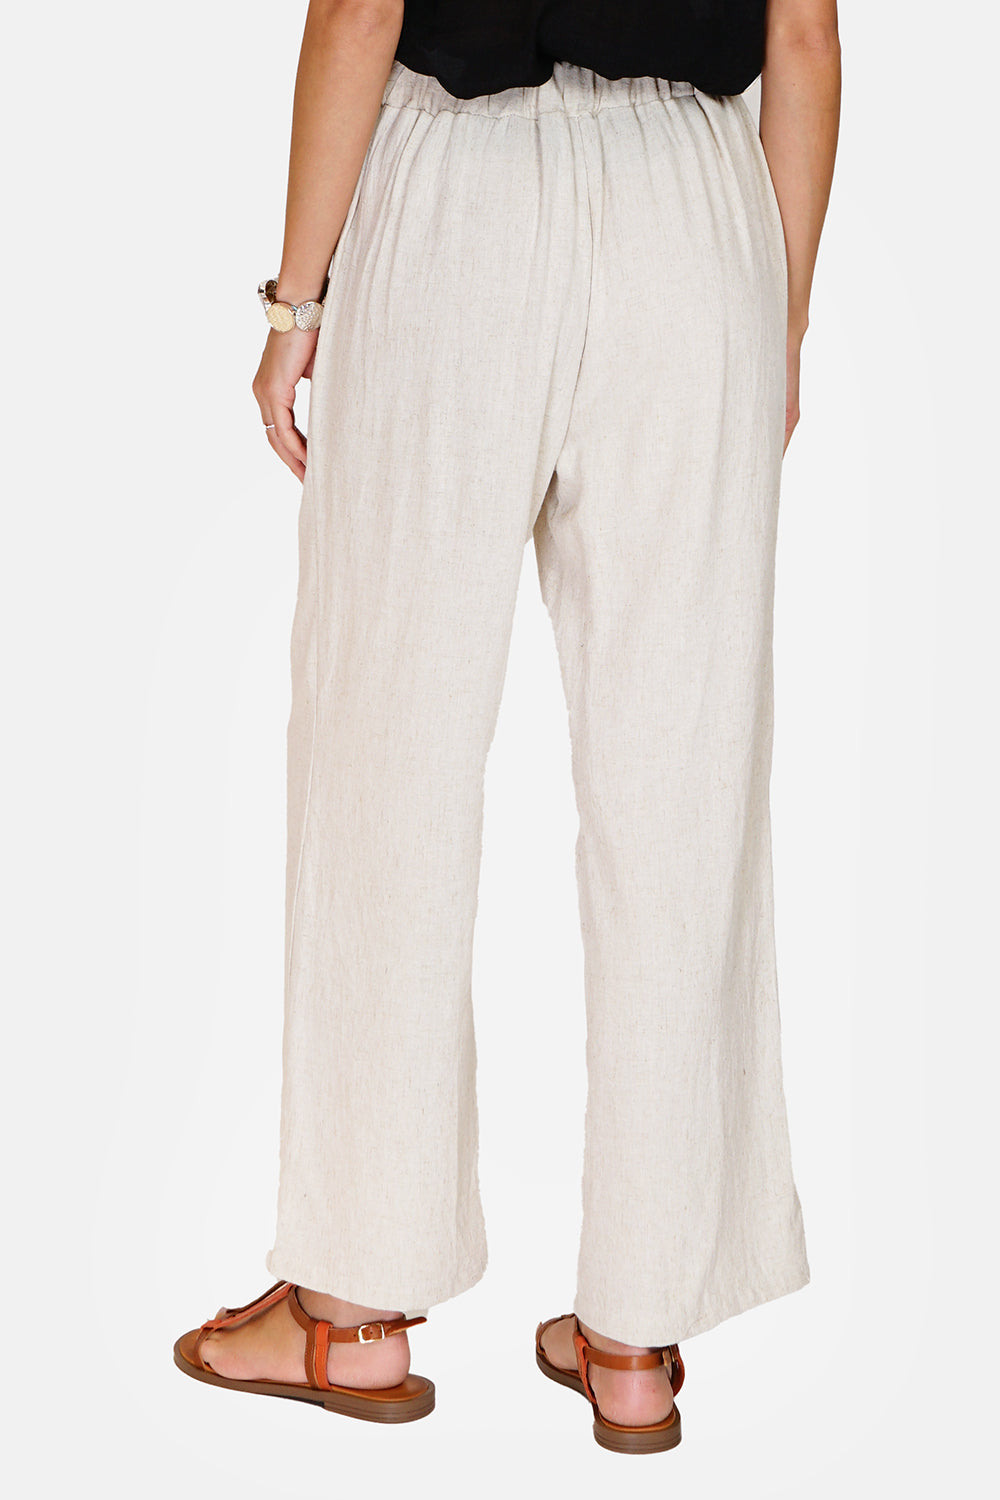 Wide pants, folded front and back, elastic waistband, high waist